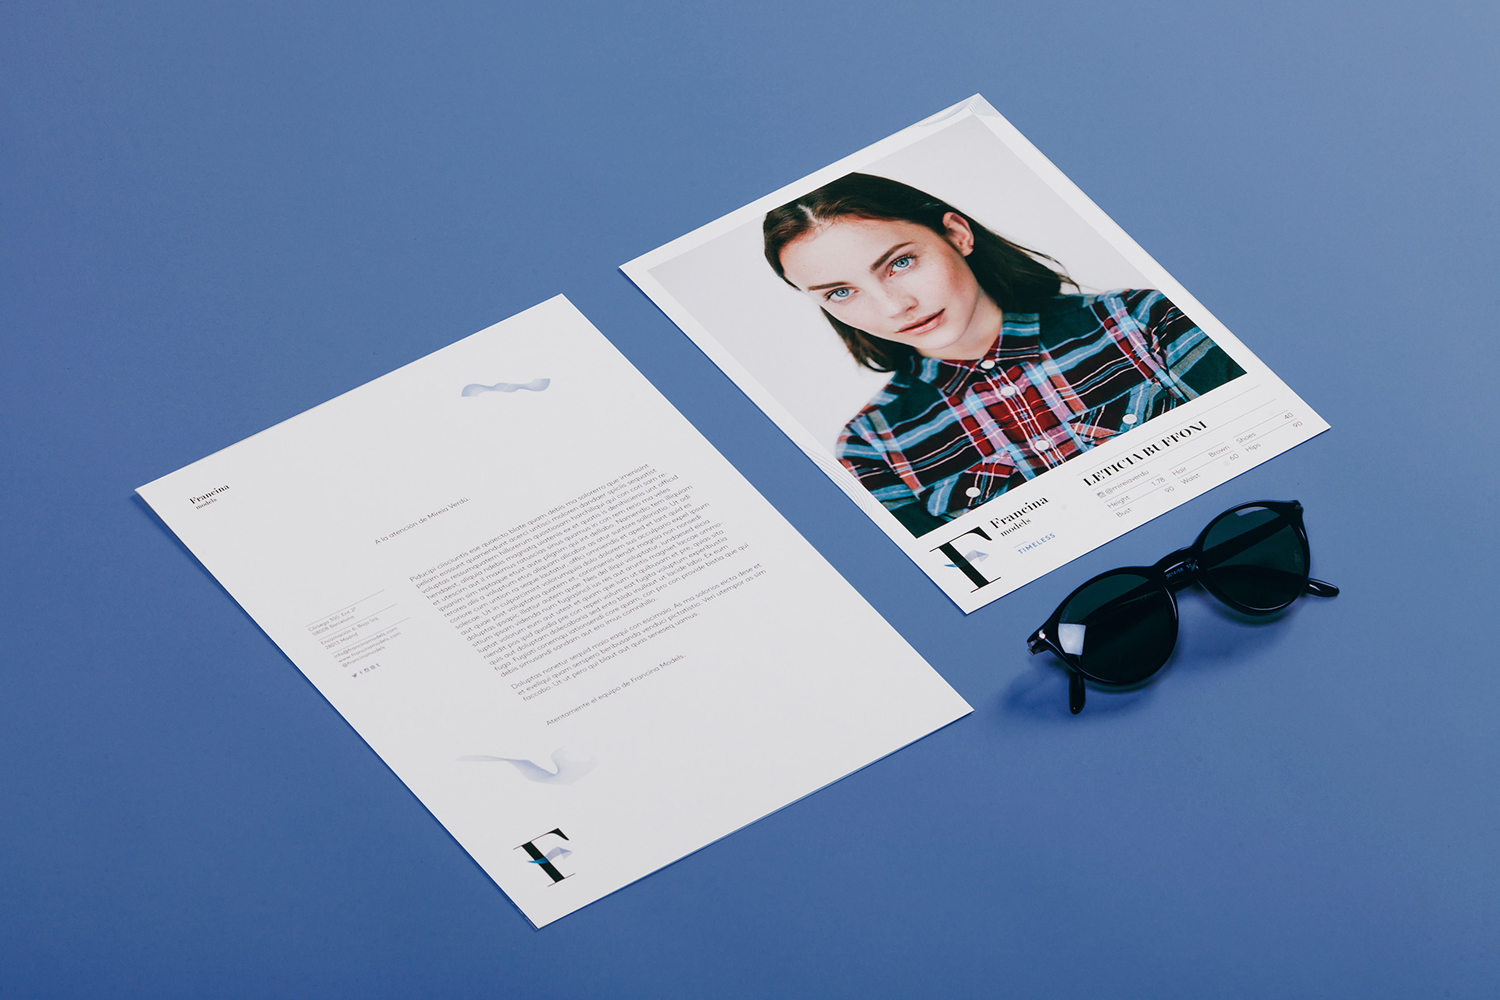 Brand identity and model cards by graphic design studio Mucho for Barcelona-based model agency Francina Models